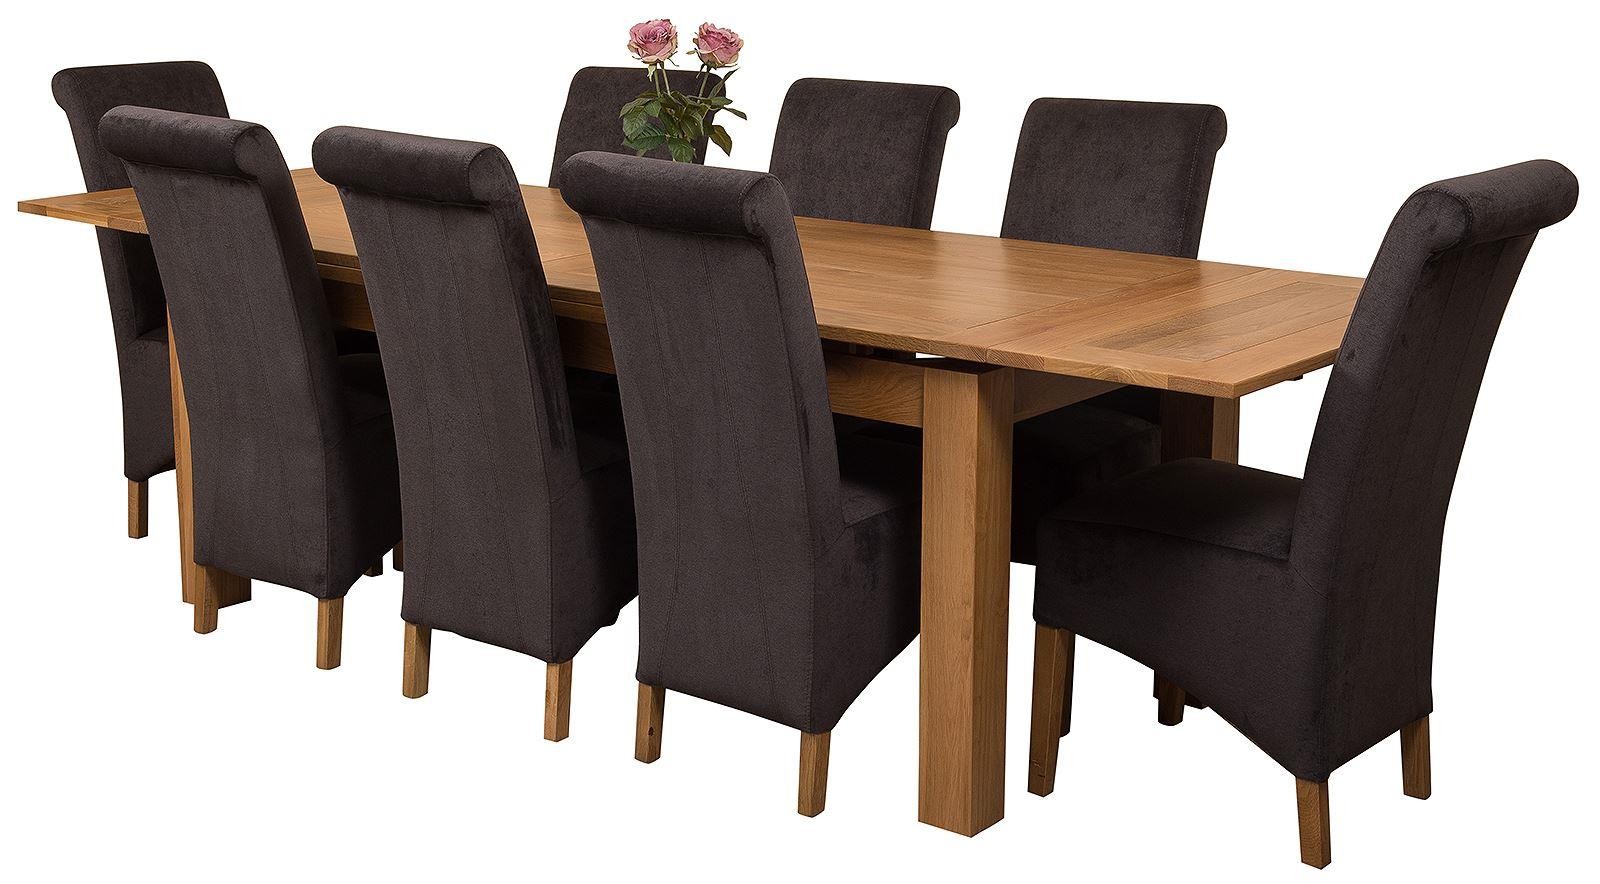 Richmond Solid Oak 200cm-280cm Extending Dining Table with 8 Montana Dining Chairs [Black Fabric]